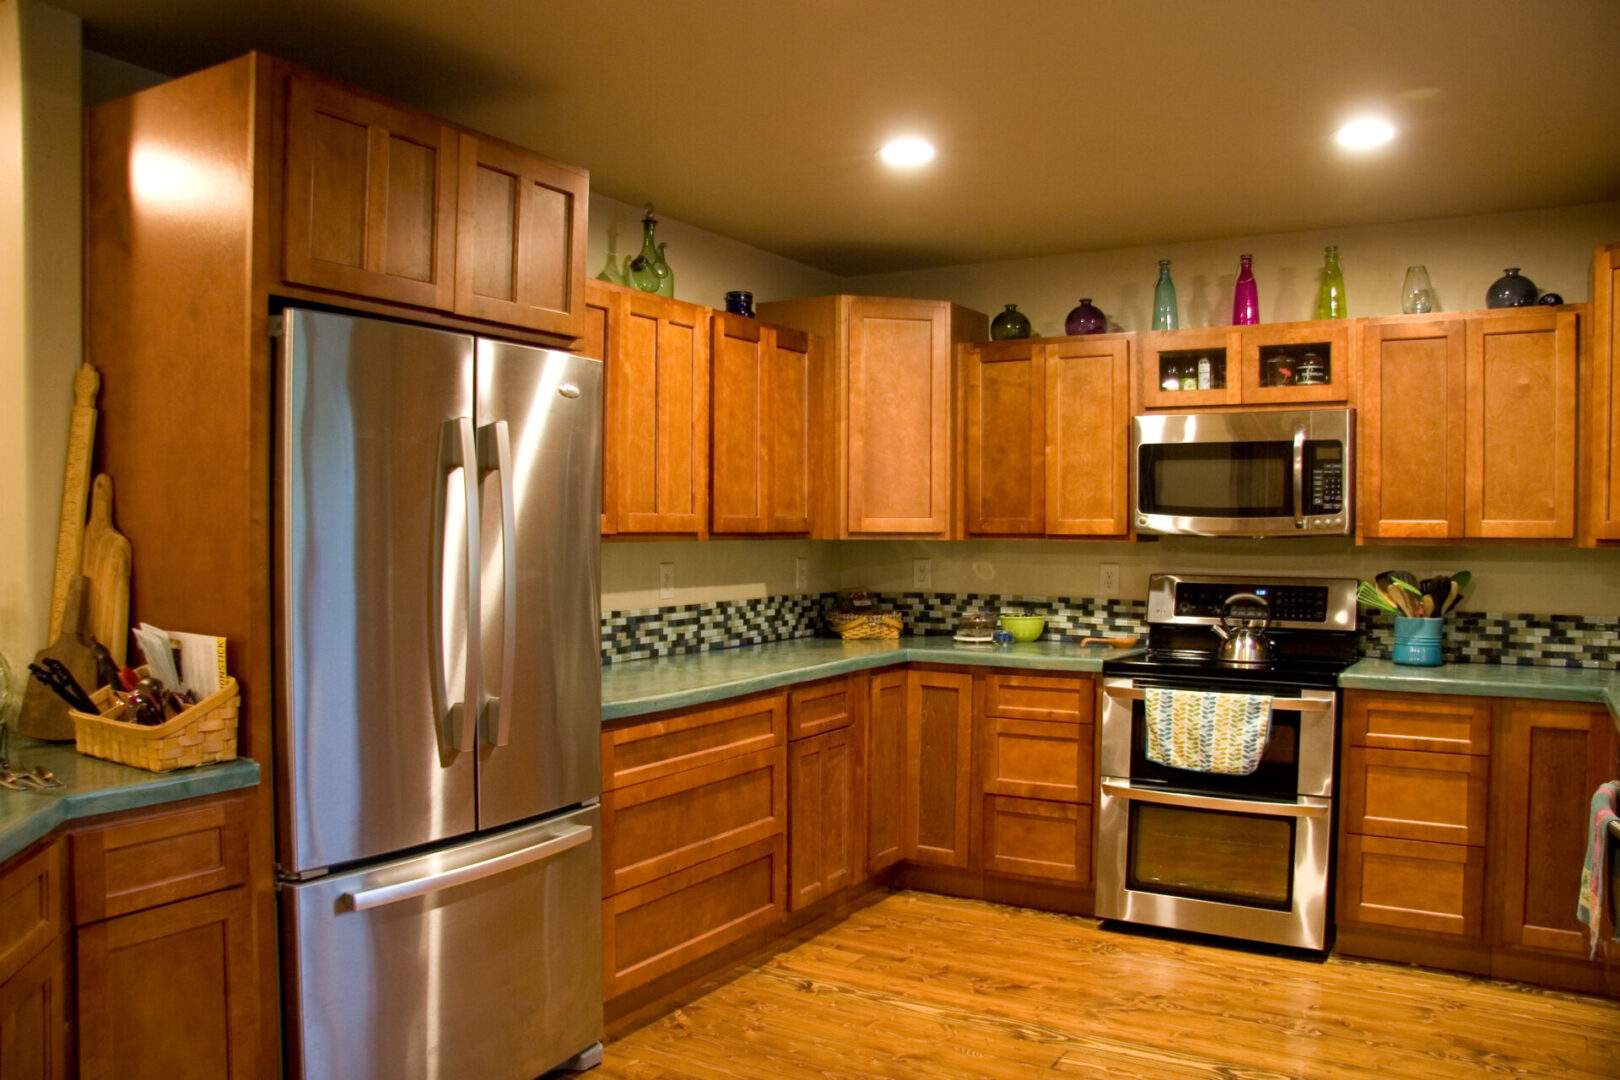 Clean kitchen with wooden cupboards